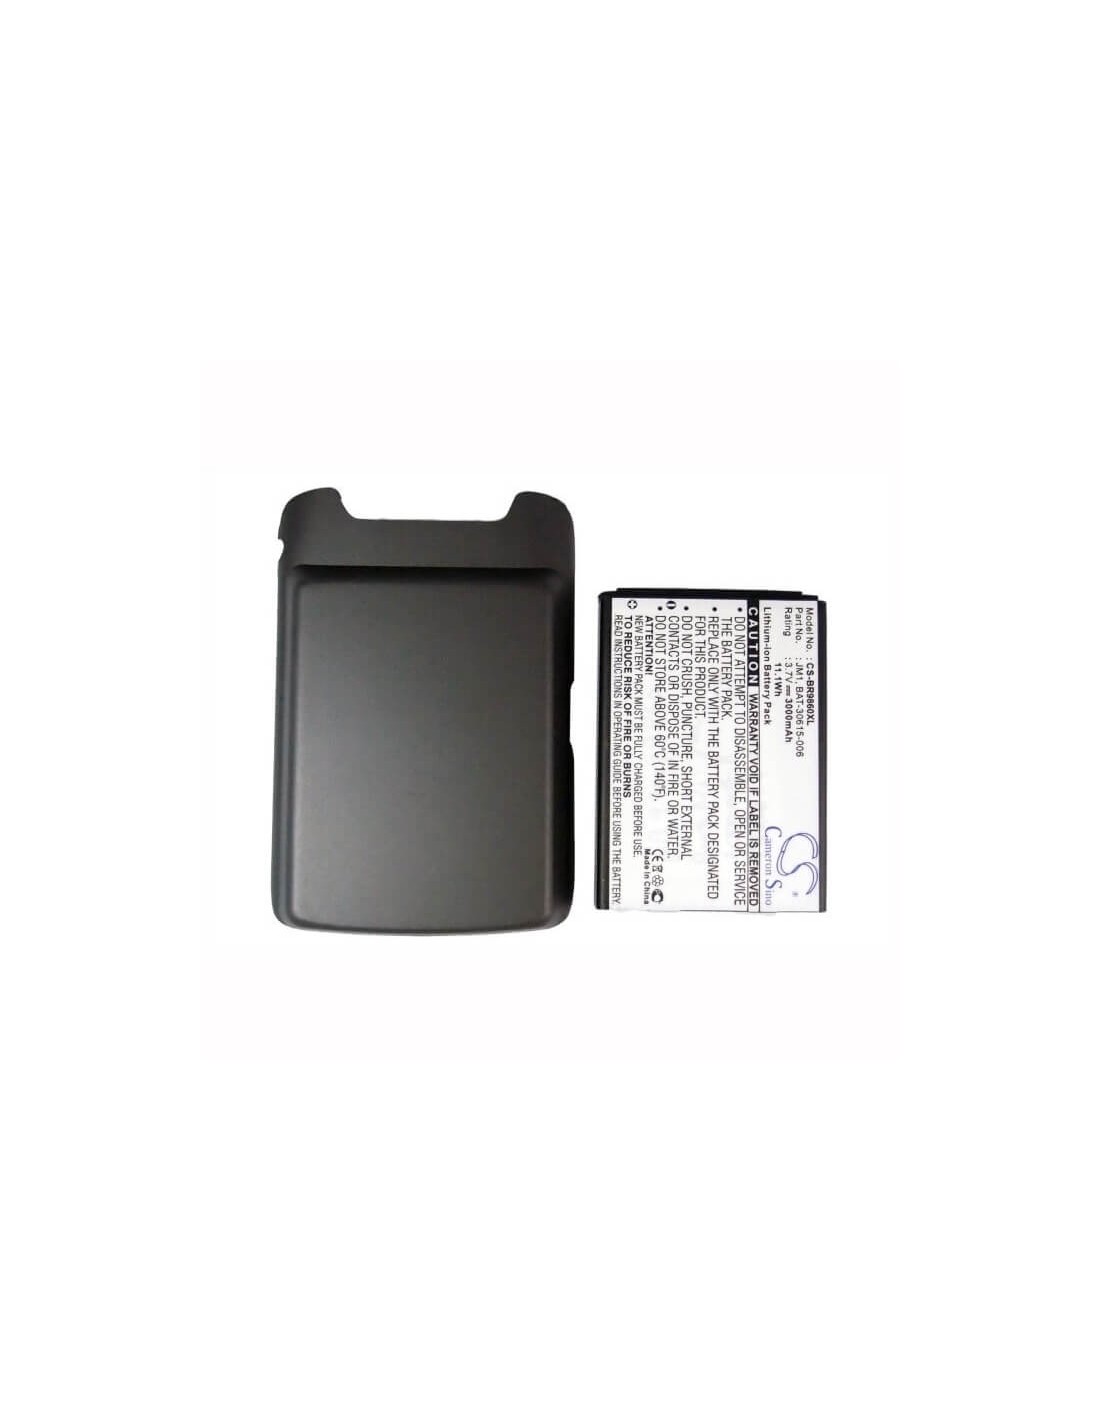 Battery for Blackberry Torch 9860, Torch 9850 3.7V, 3000mAh - 11.10Wh